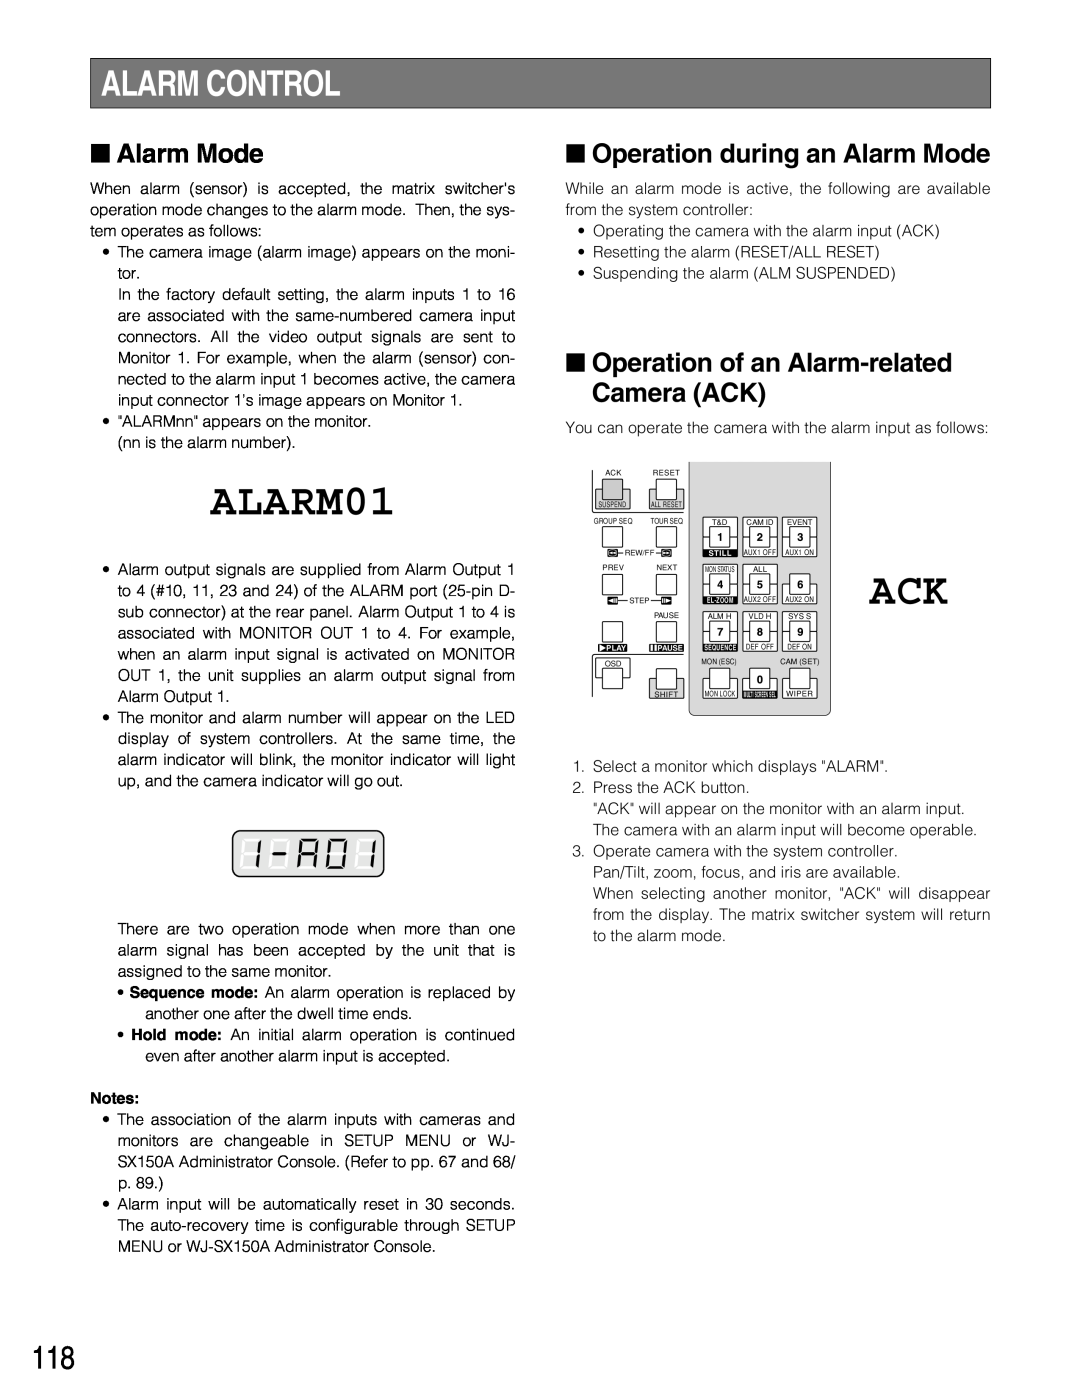 Panasonic WJ-SX150A manual ALARM01, Alarm Control, Operation during an Alarm Mode, Operation of an Alarm-related Camera ACK 